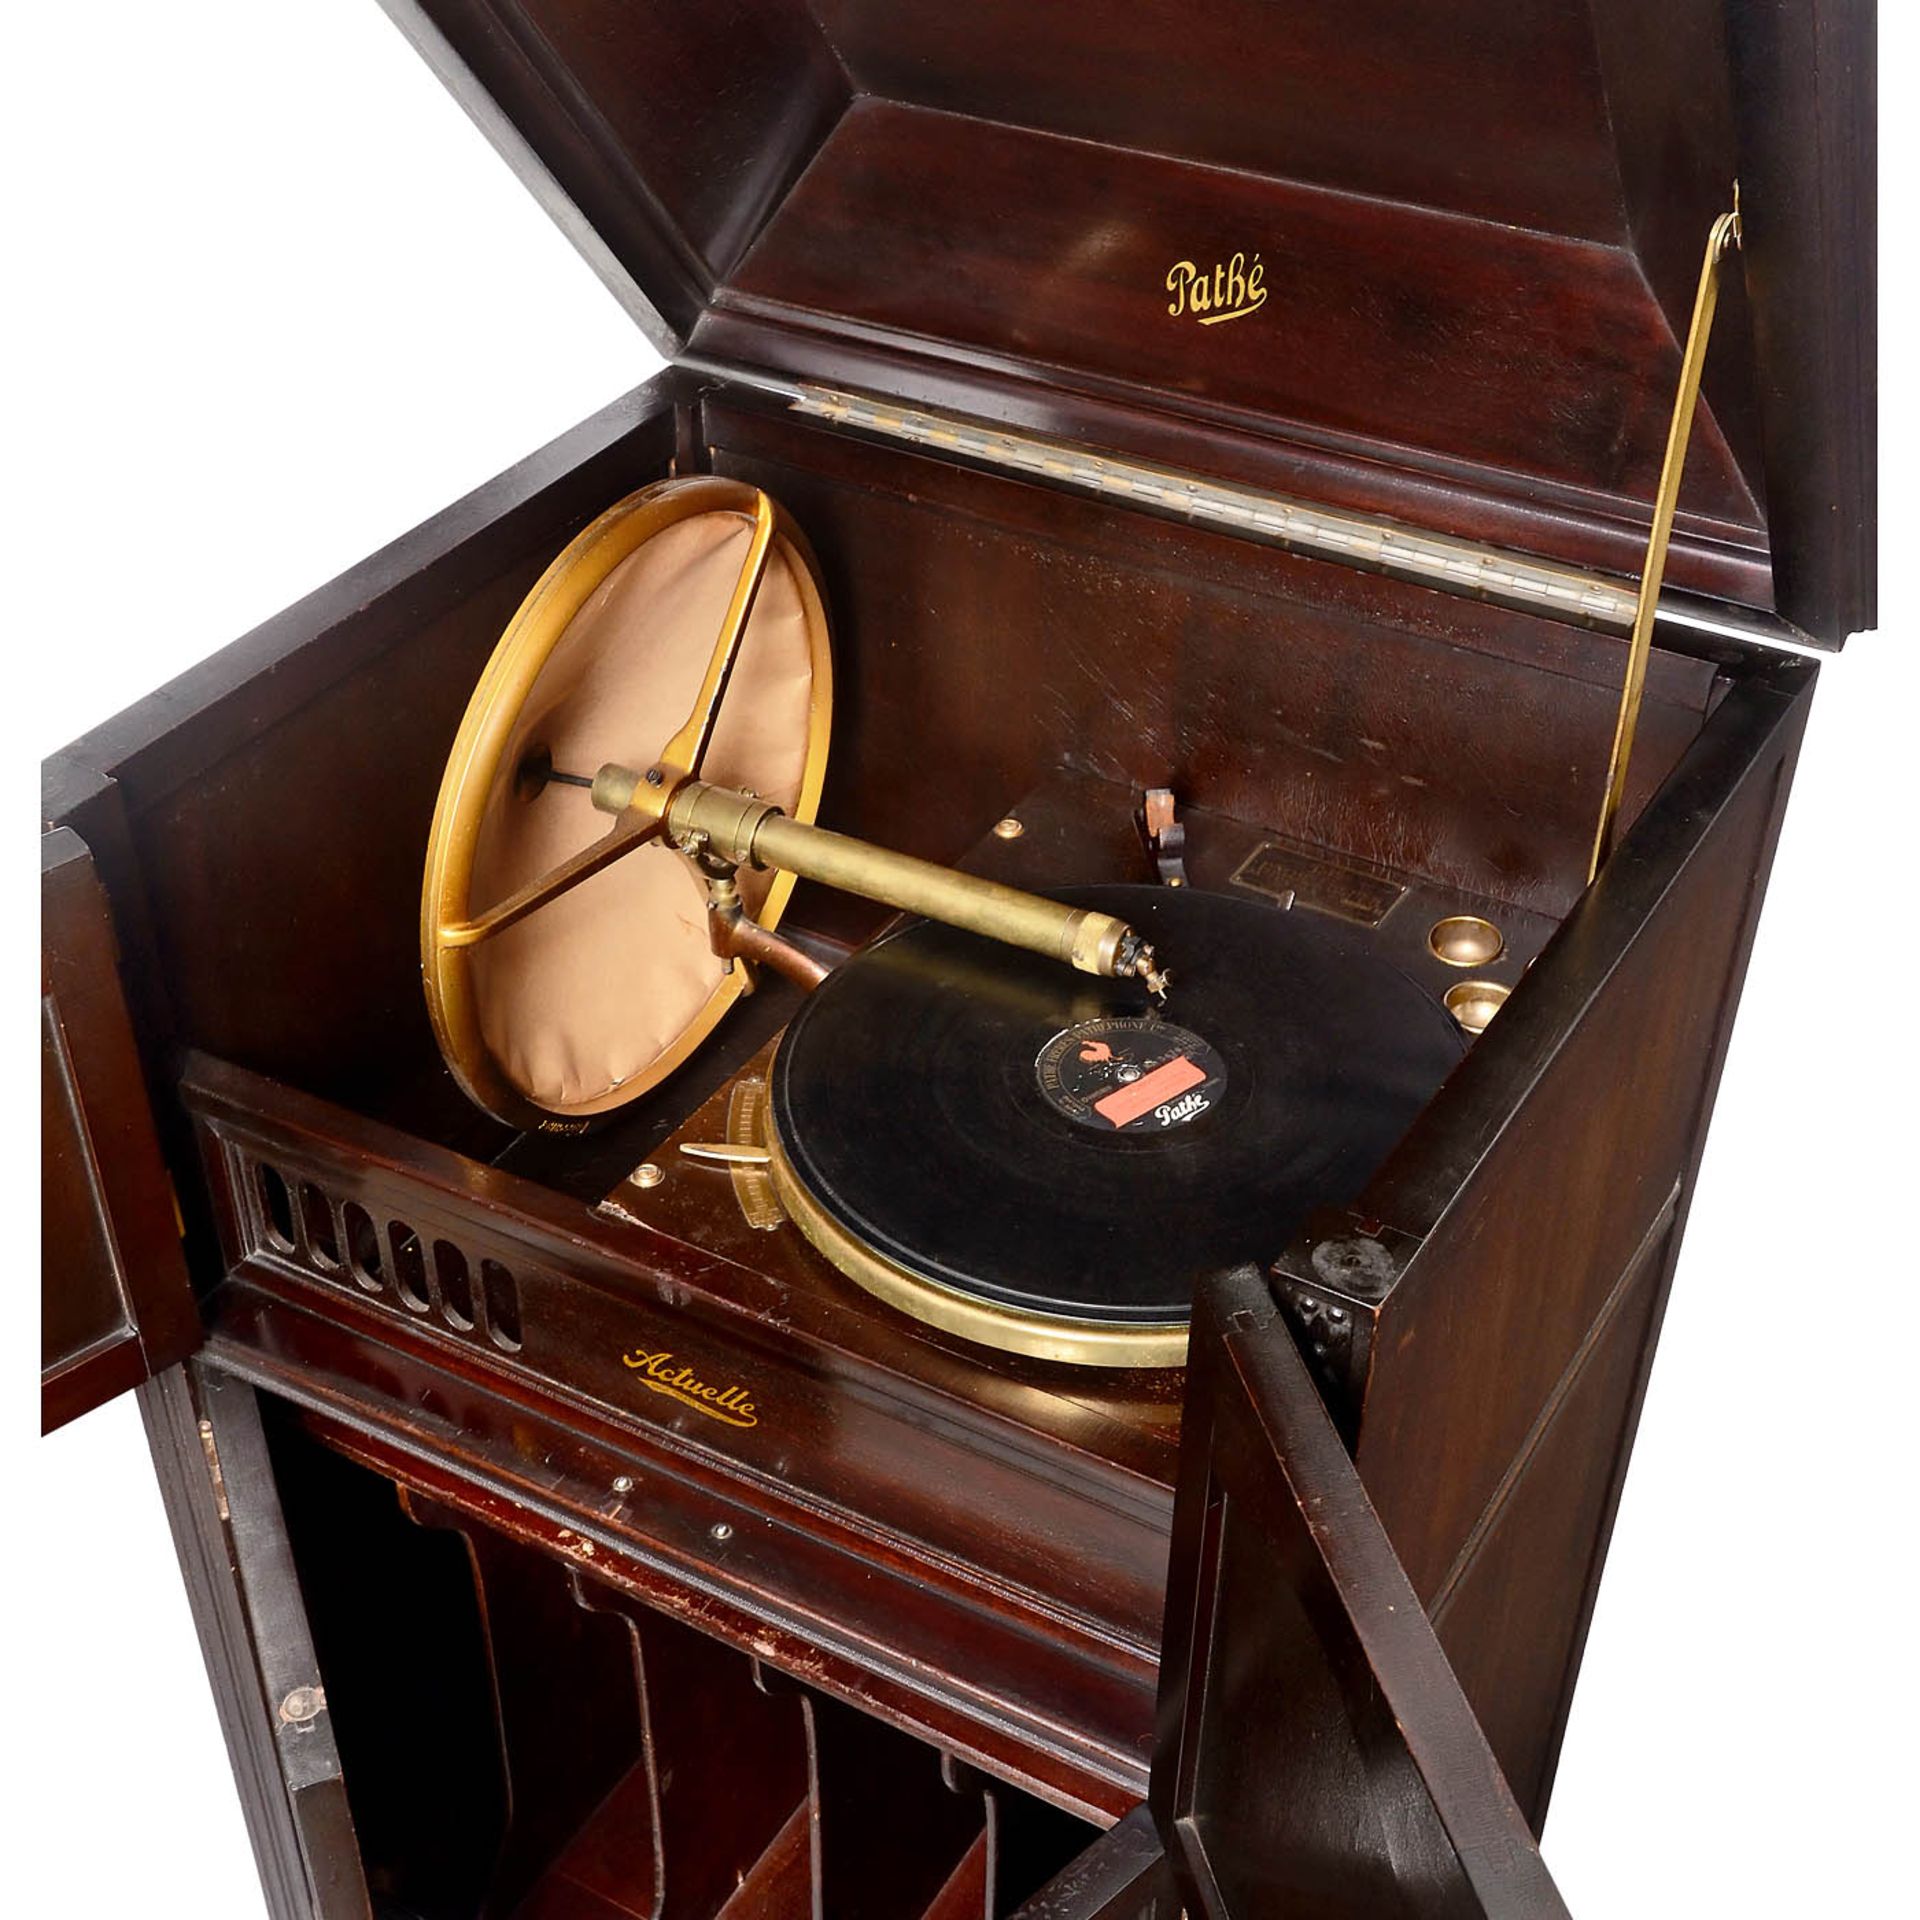 Path&#233; Actuelle Cabinet Gramophone, c. 1925 - Image 2 of 2